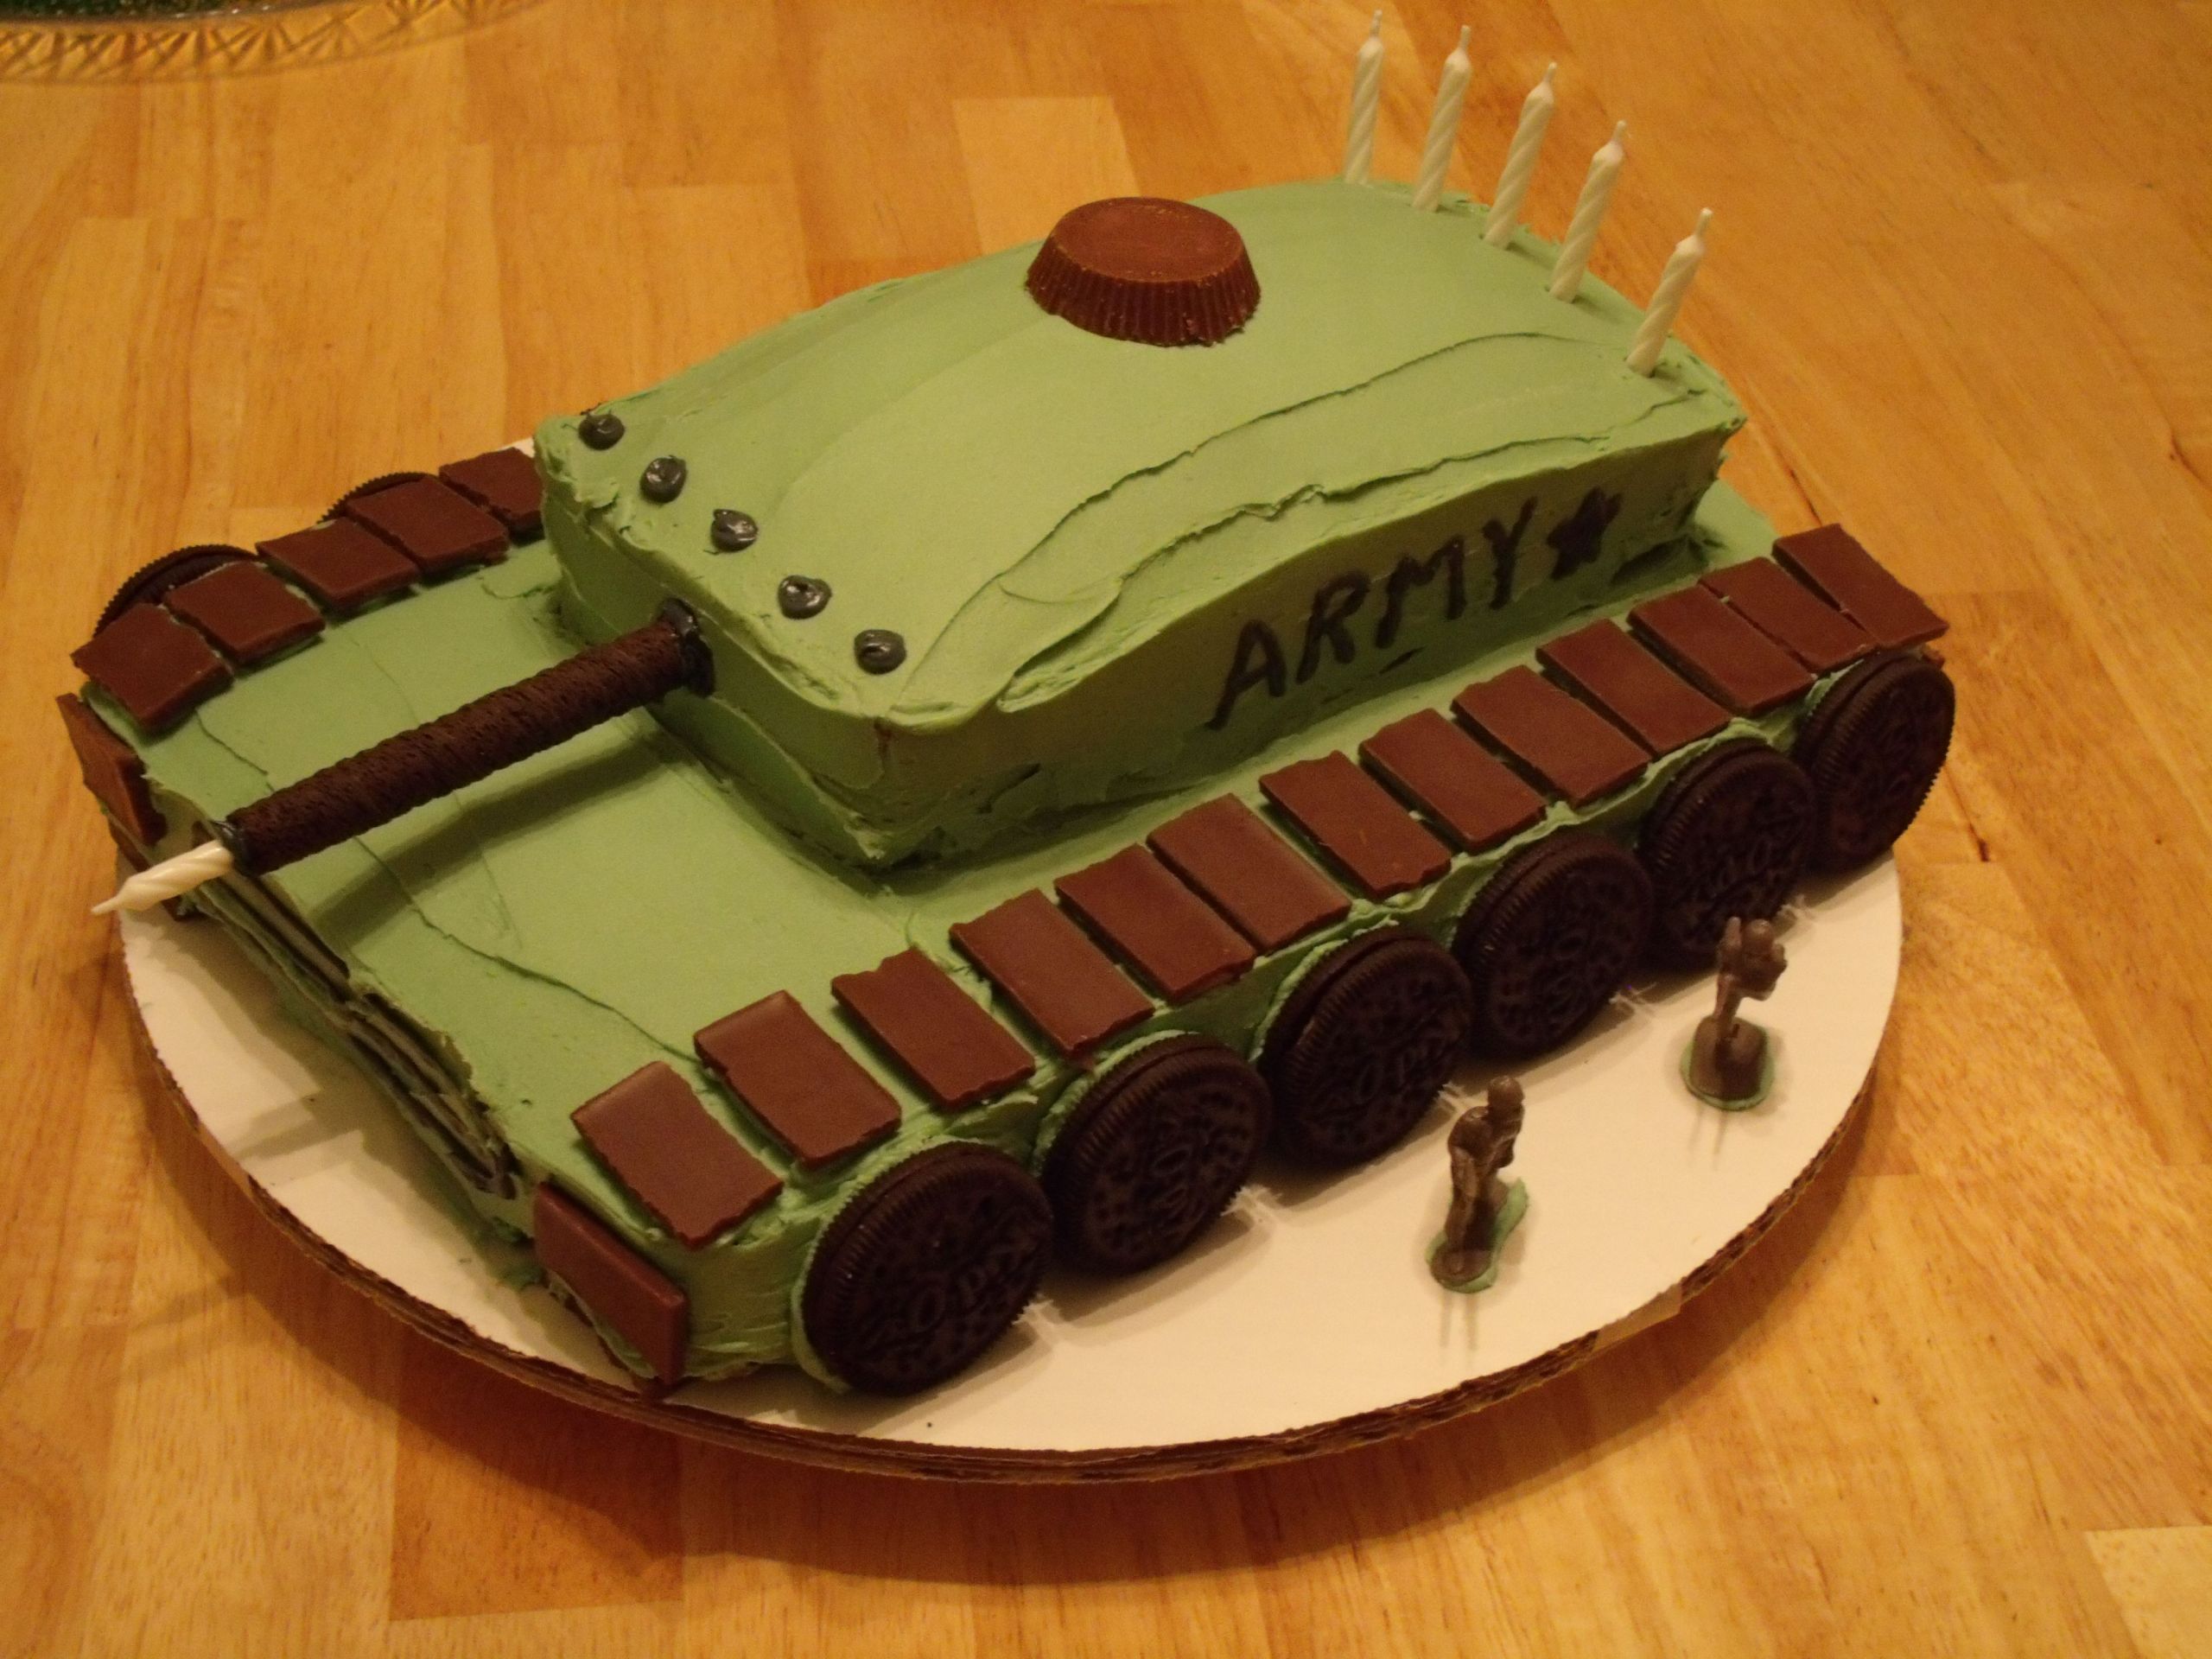 Army Birthday Cakes
 Army tank cake by me in 2019